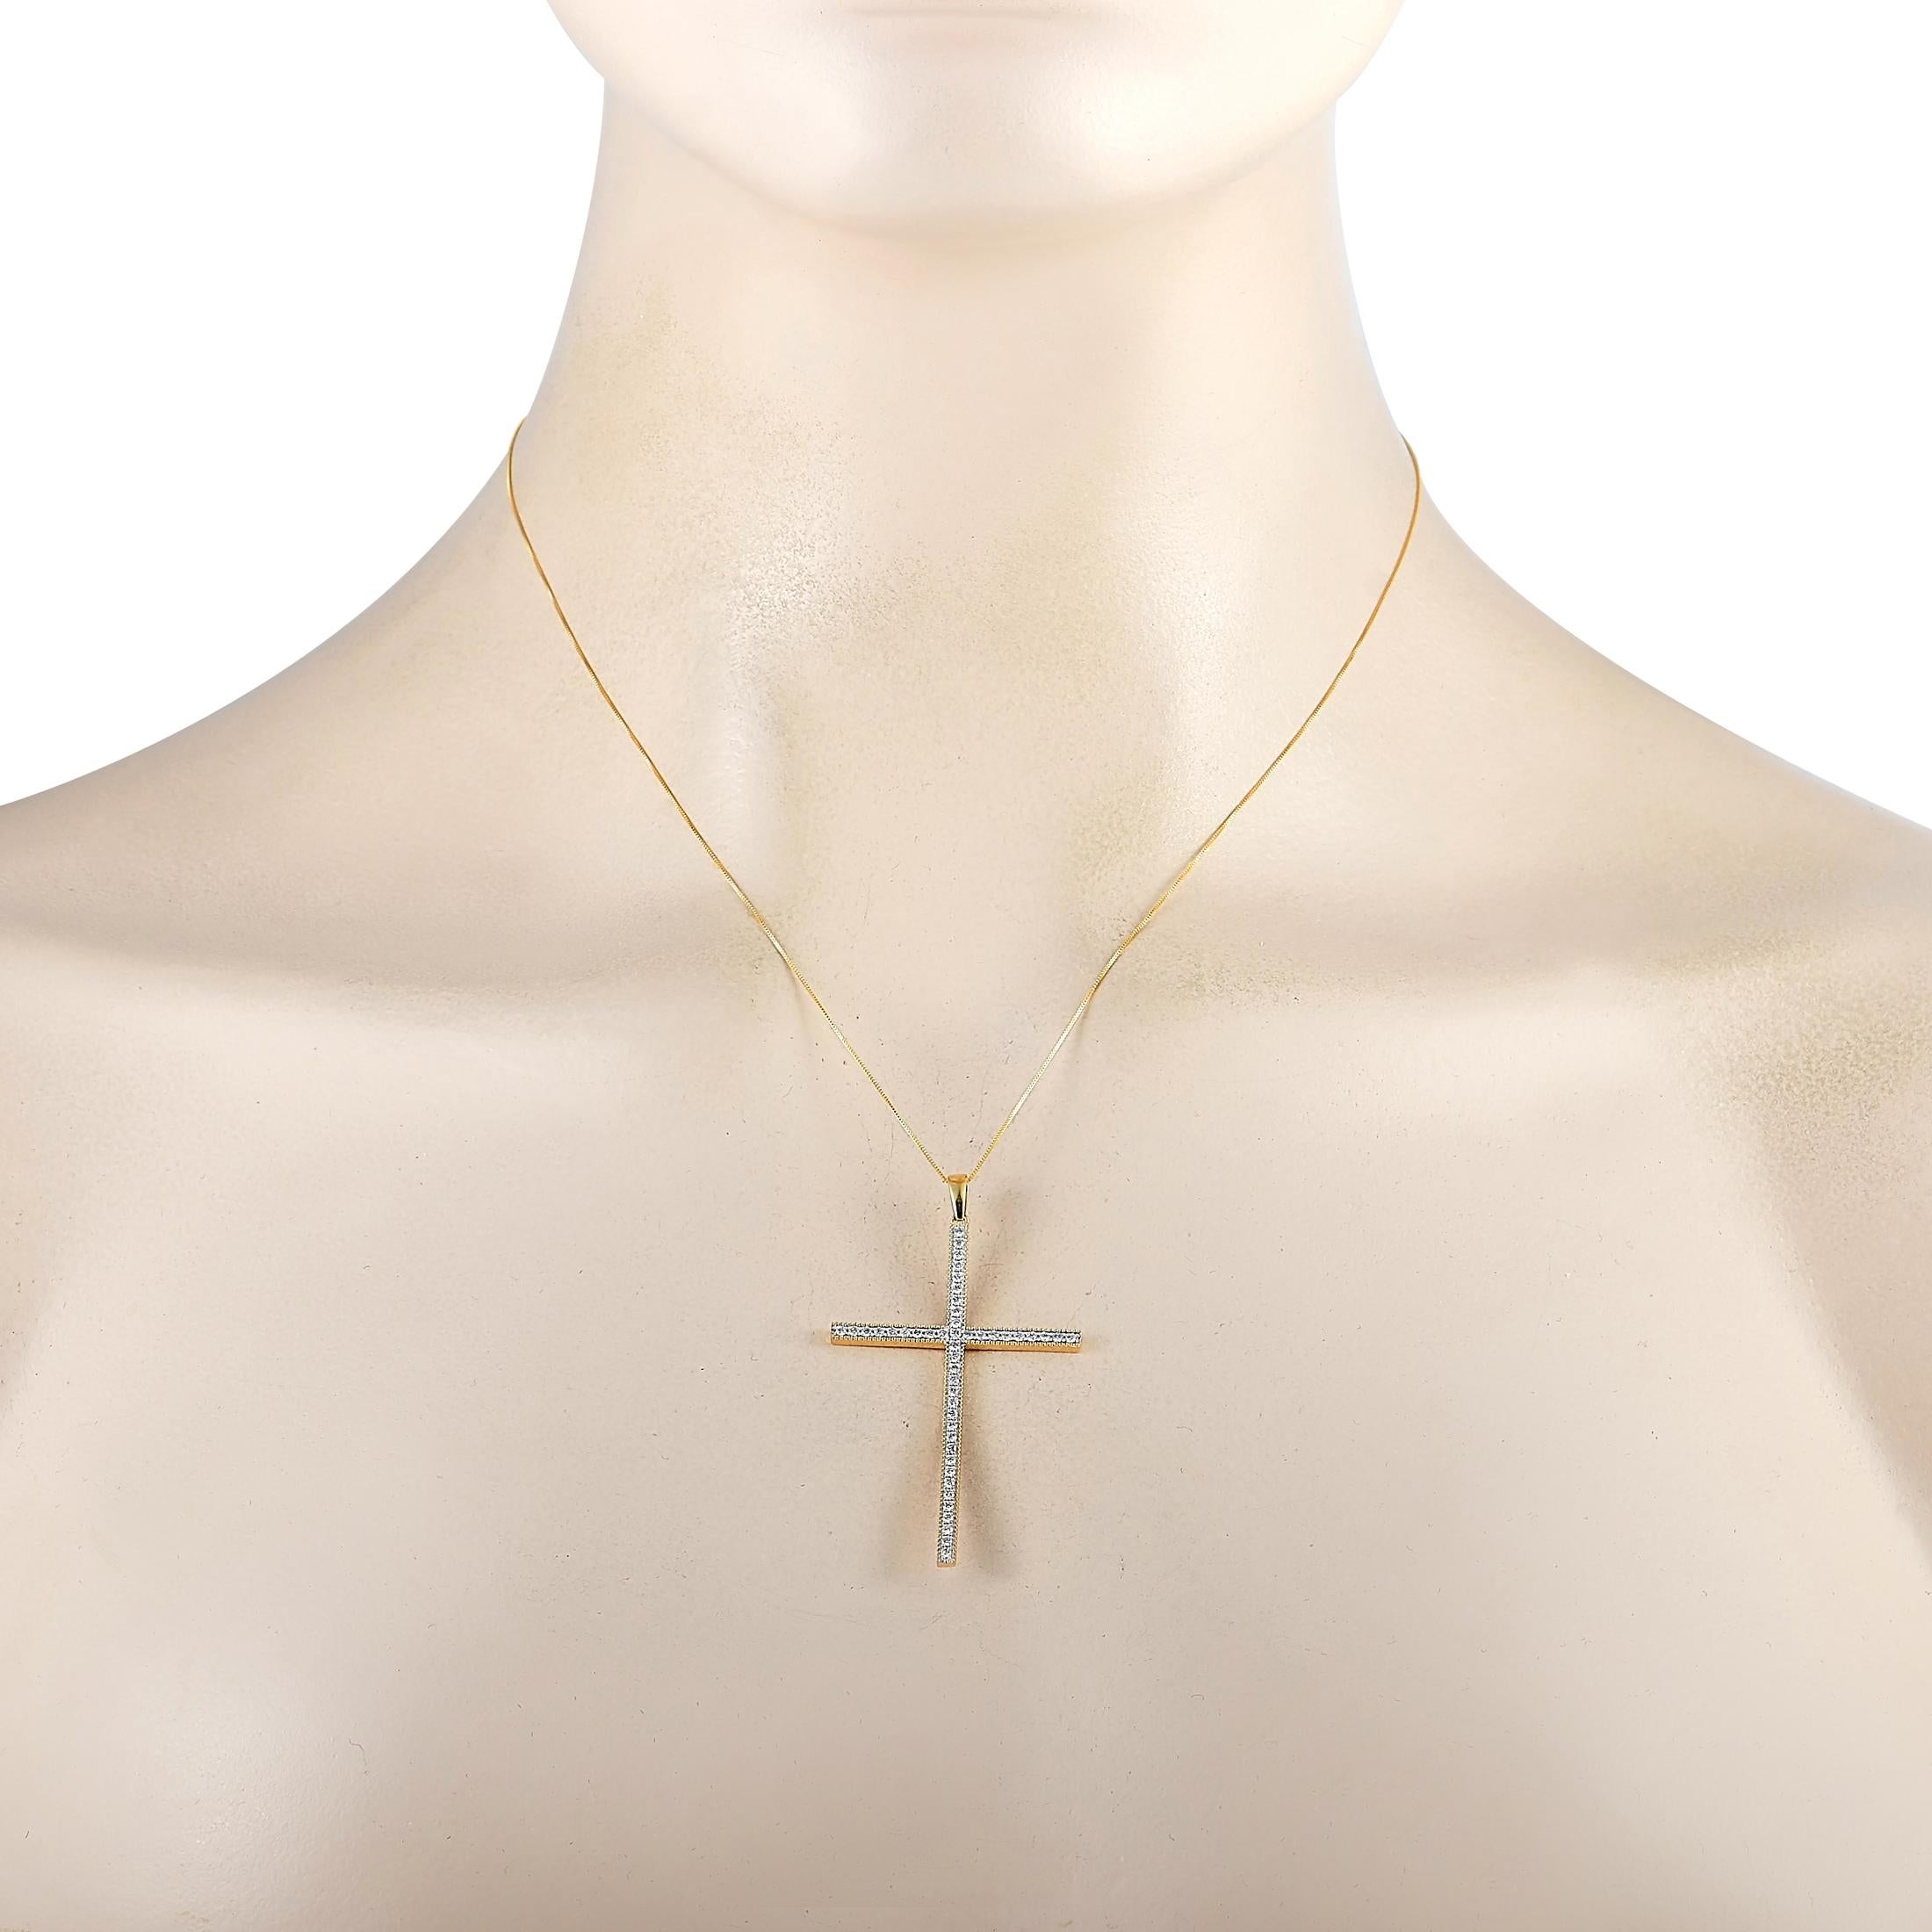 This LB Exclusive necklace is crafted from 14K yellow gold and weighs 3.8 grams. It is presented with a 17” chain and boasts a cross pendant that measures 2” in length and 1.25” in width. The necklace is set with diamonds that total 0.50 carats.
 
